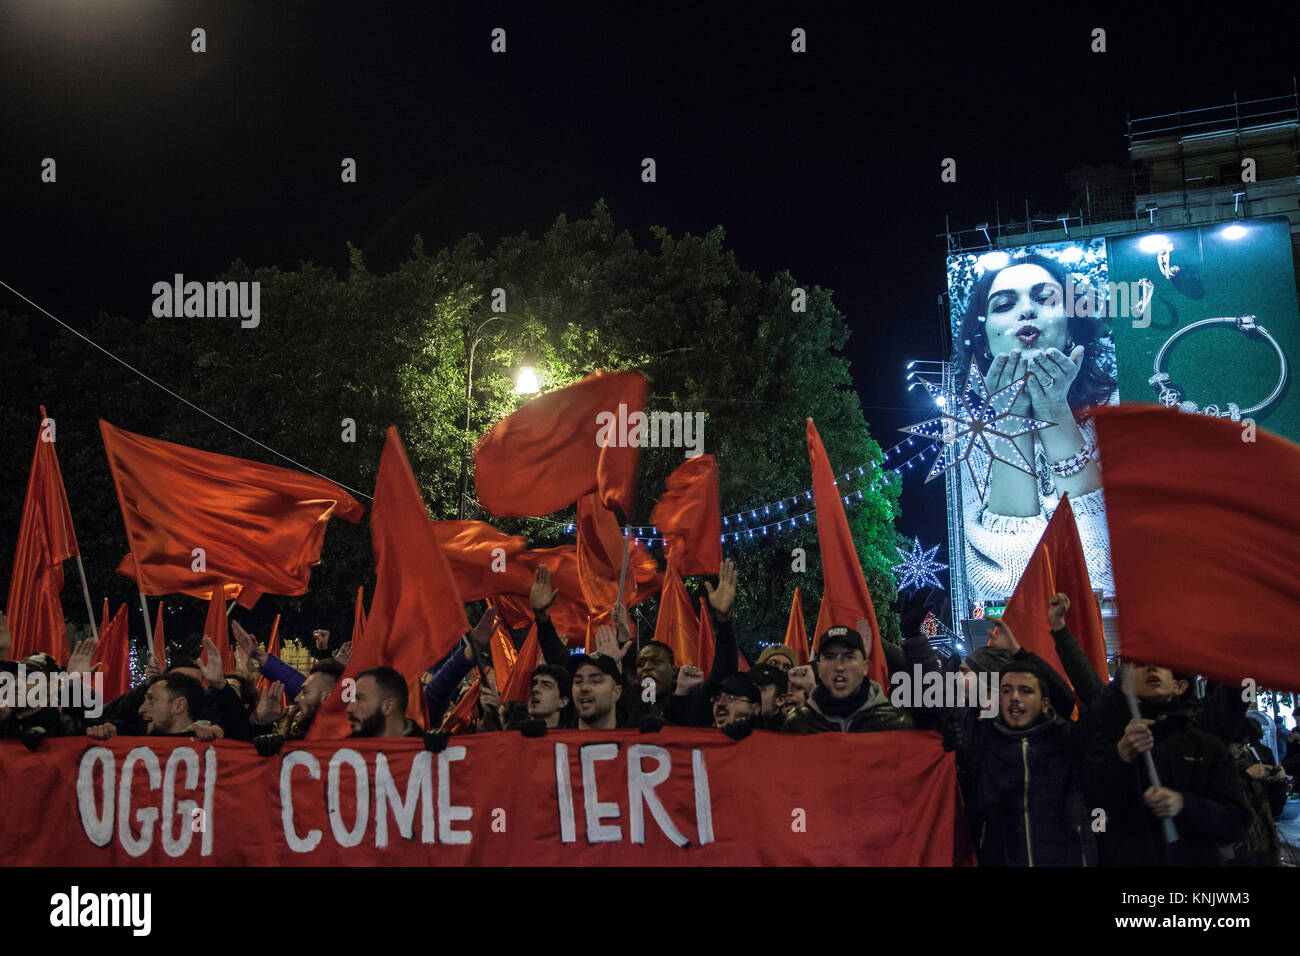 Palermo, Italy. 12th December, 2017. Antifascist militants participated a demonstration in Palermo to remember victims of the Piazza Fontana massacre. Stock Photo